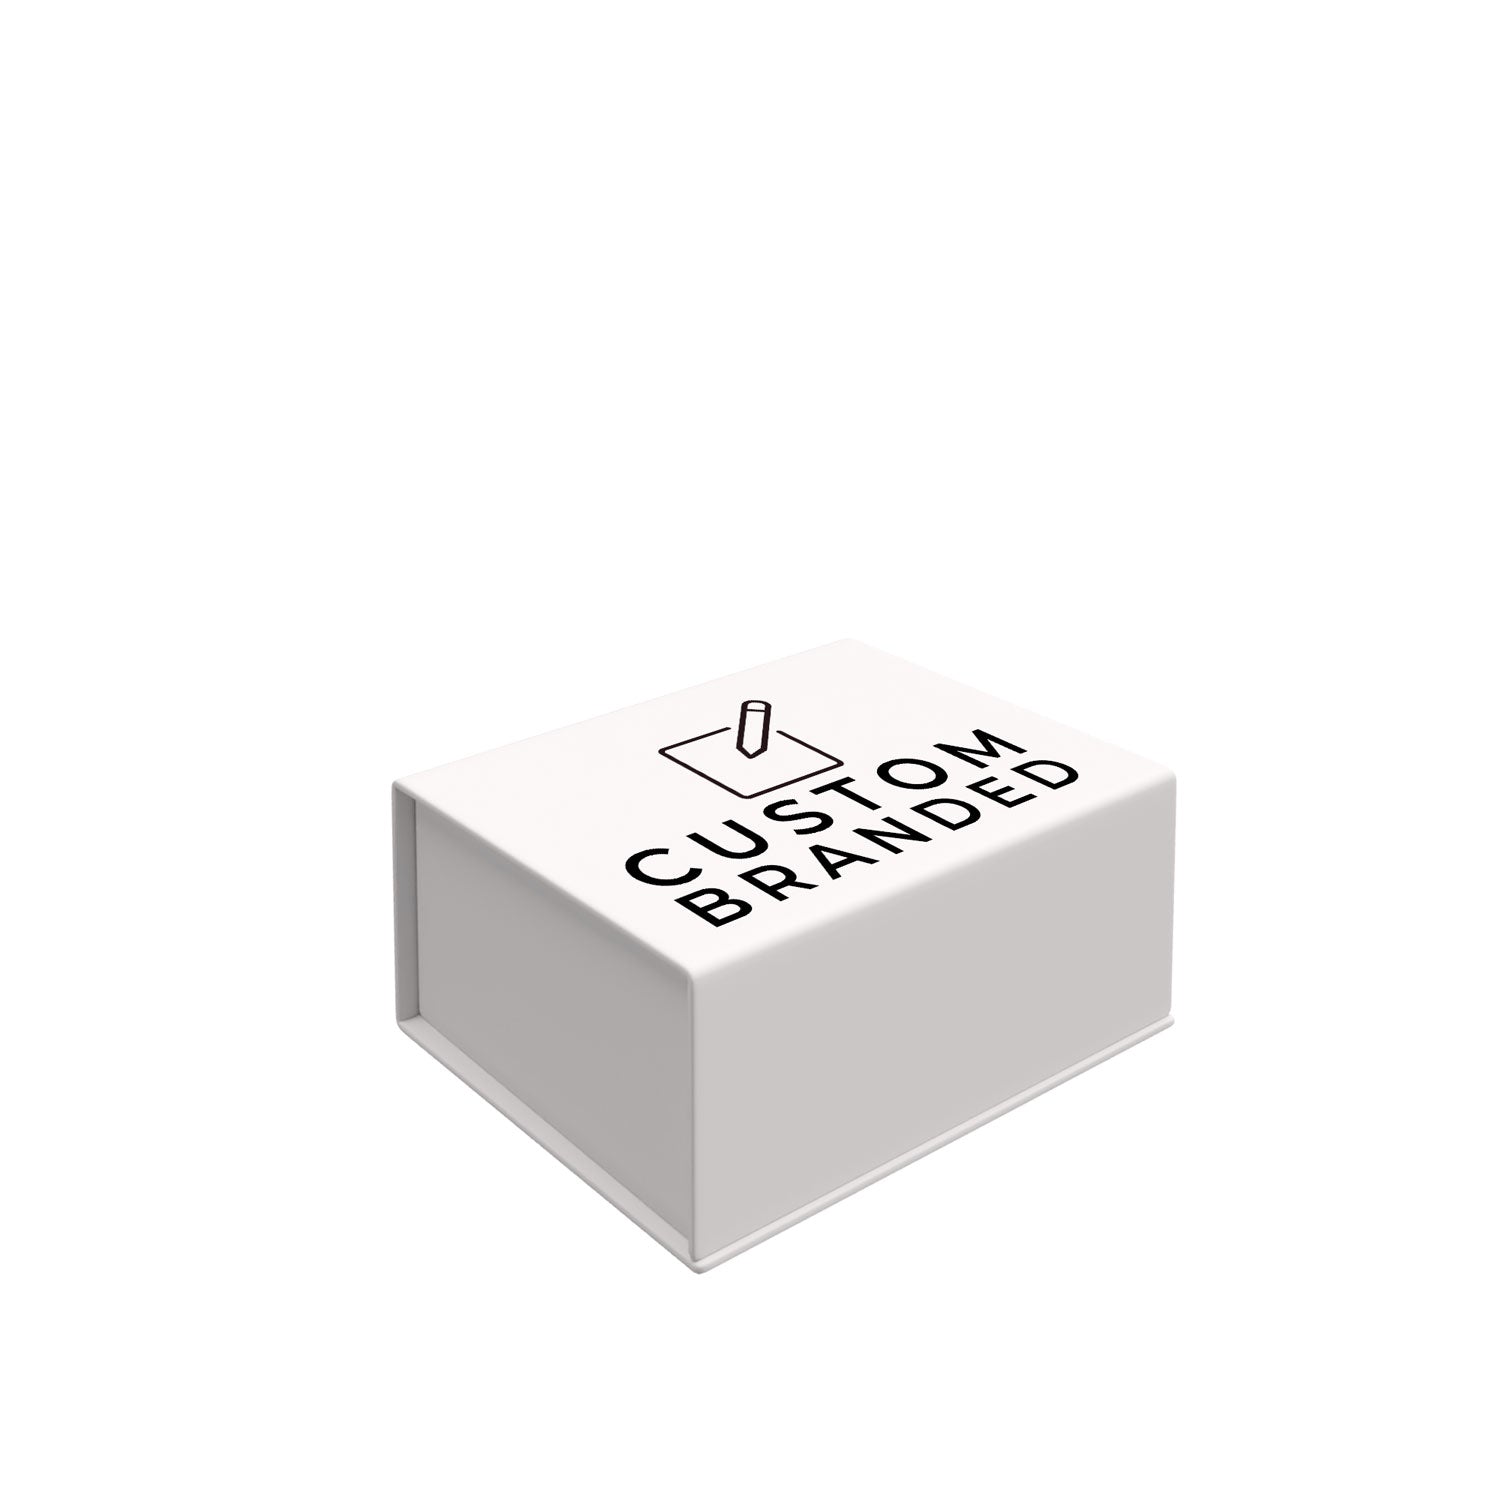 A printed white gift box, medium in size, displaying the word "custom" on its surface, indicating a personalized and branded item | NEON Packaging